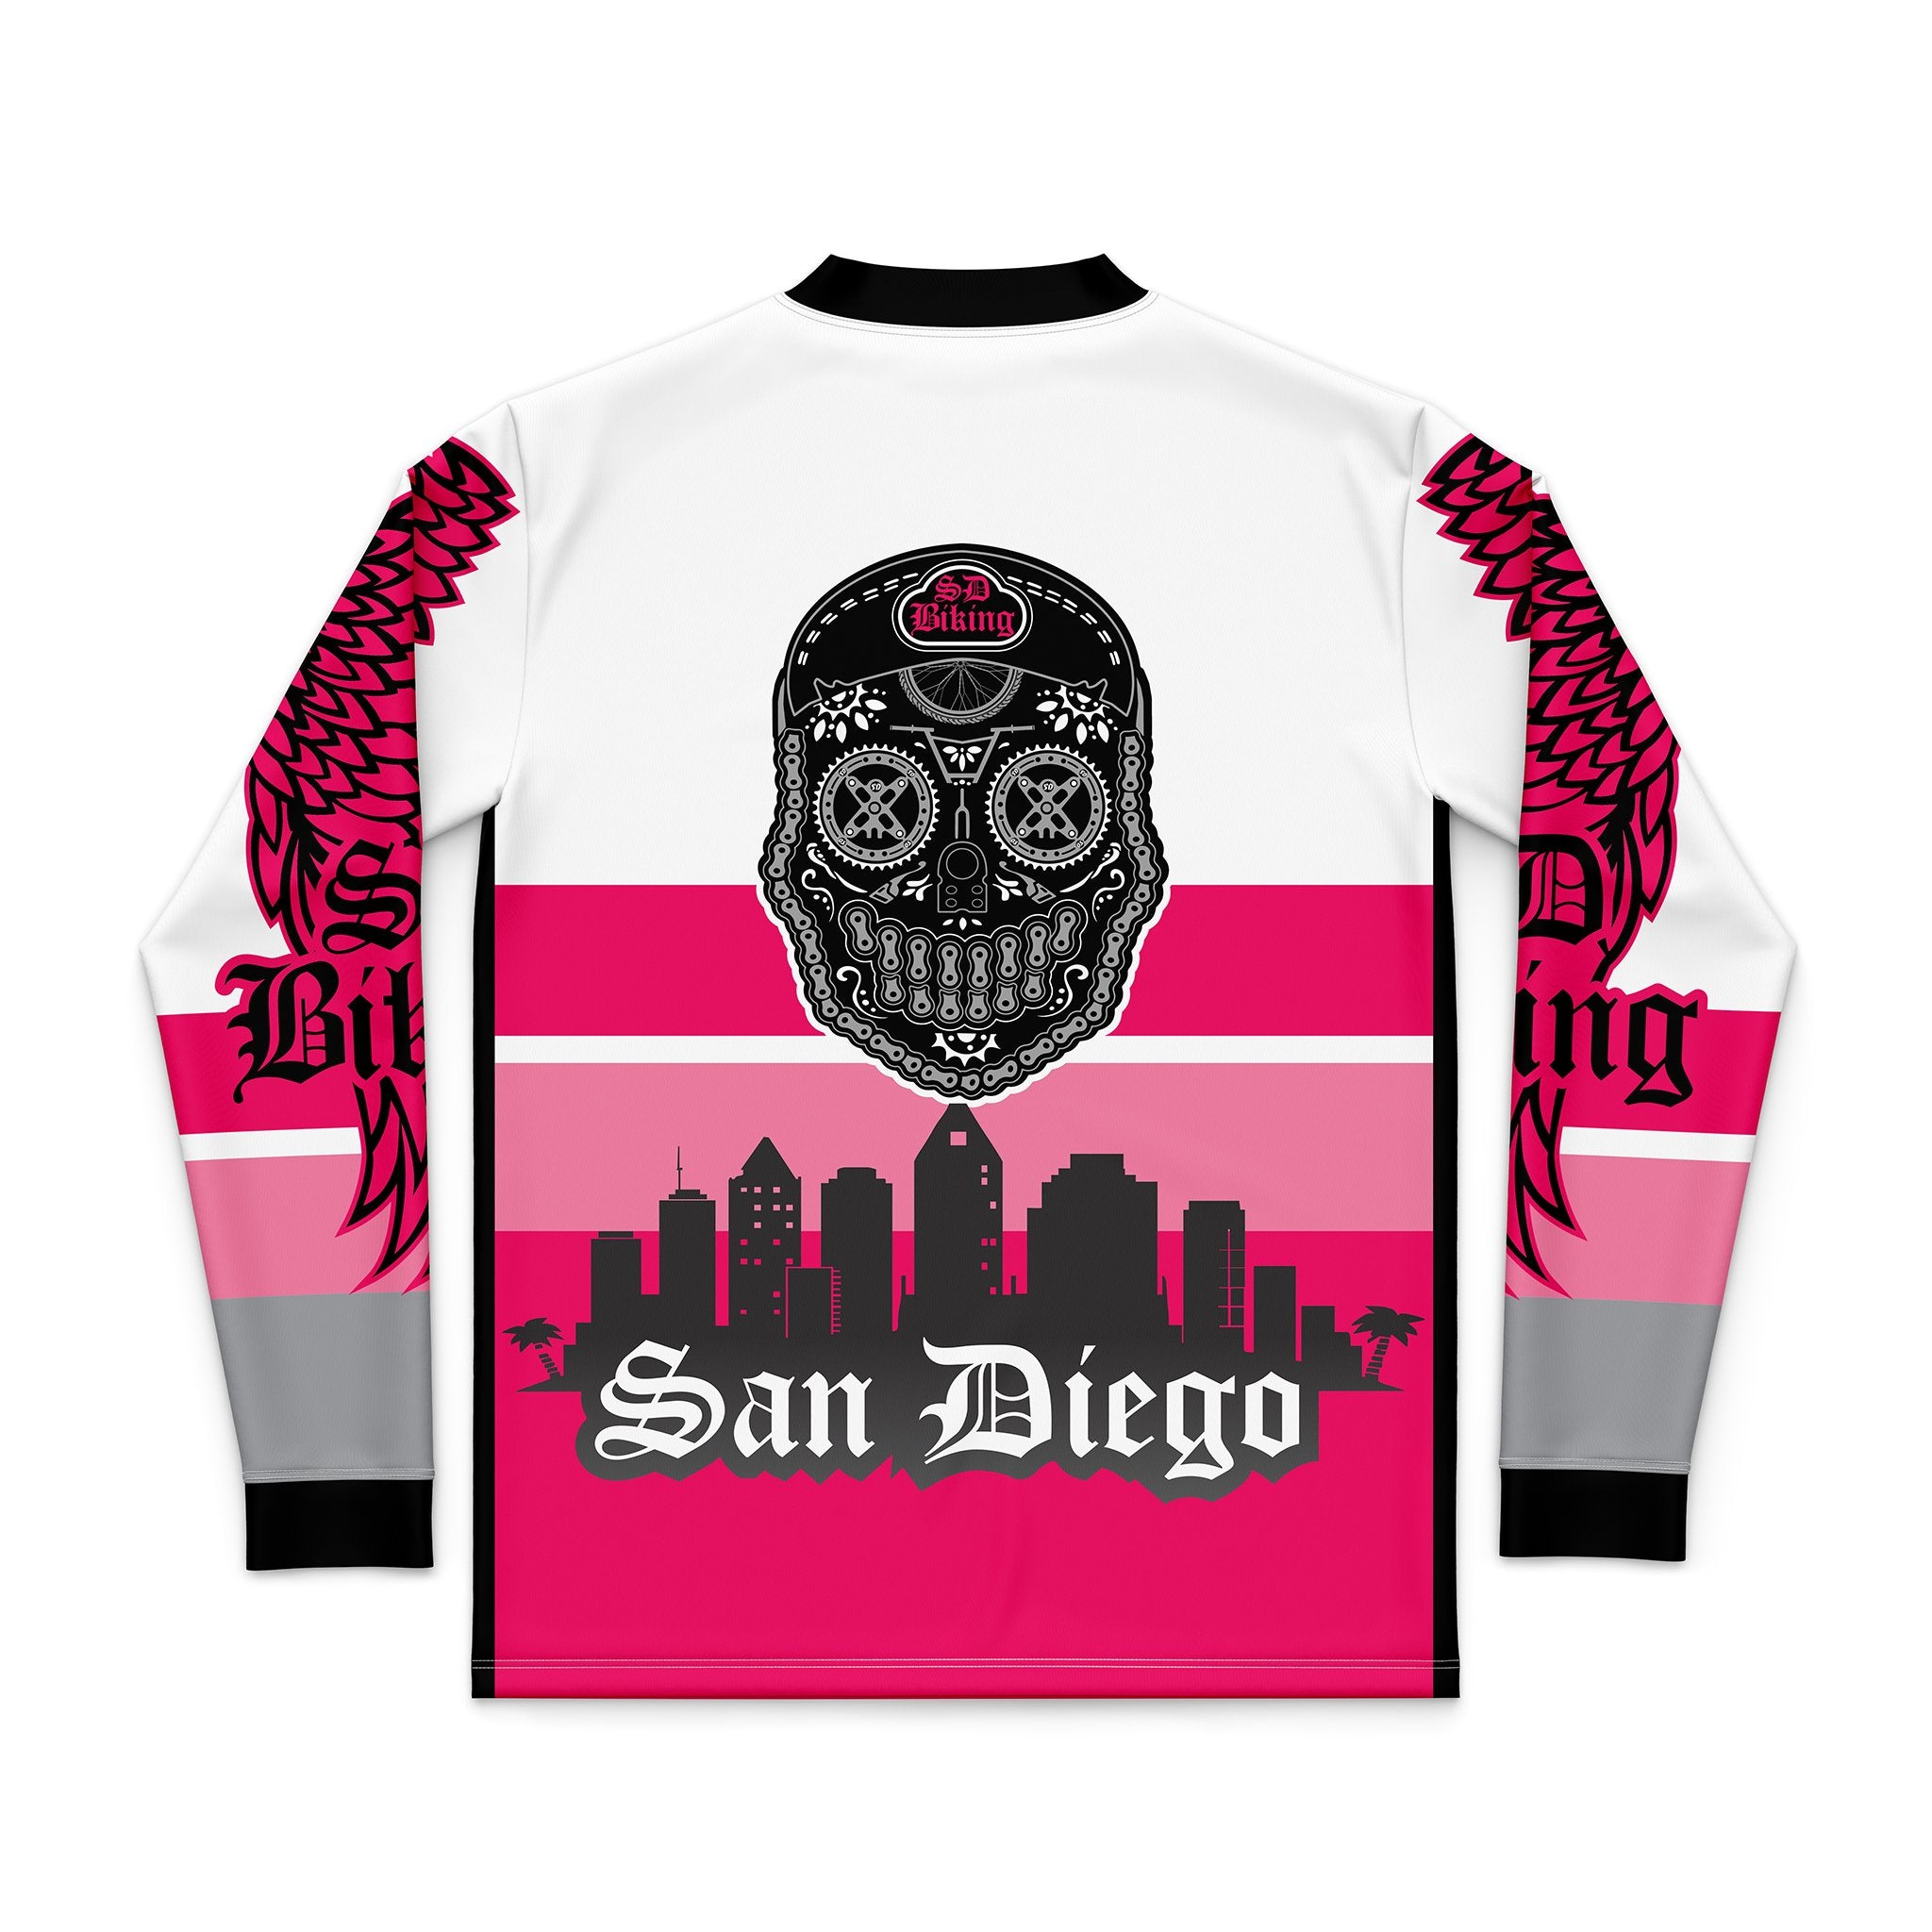 Youth Long Sleeve, V-Neck Pink Retro, Breast Cancer Awareness Jersey